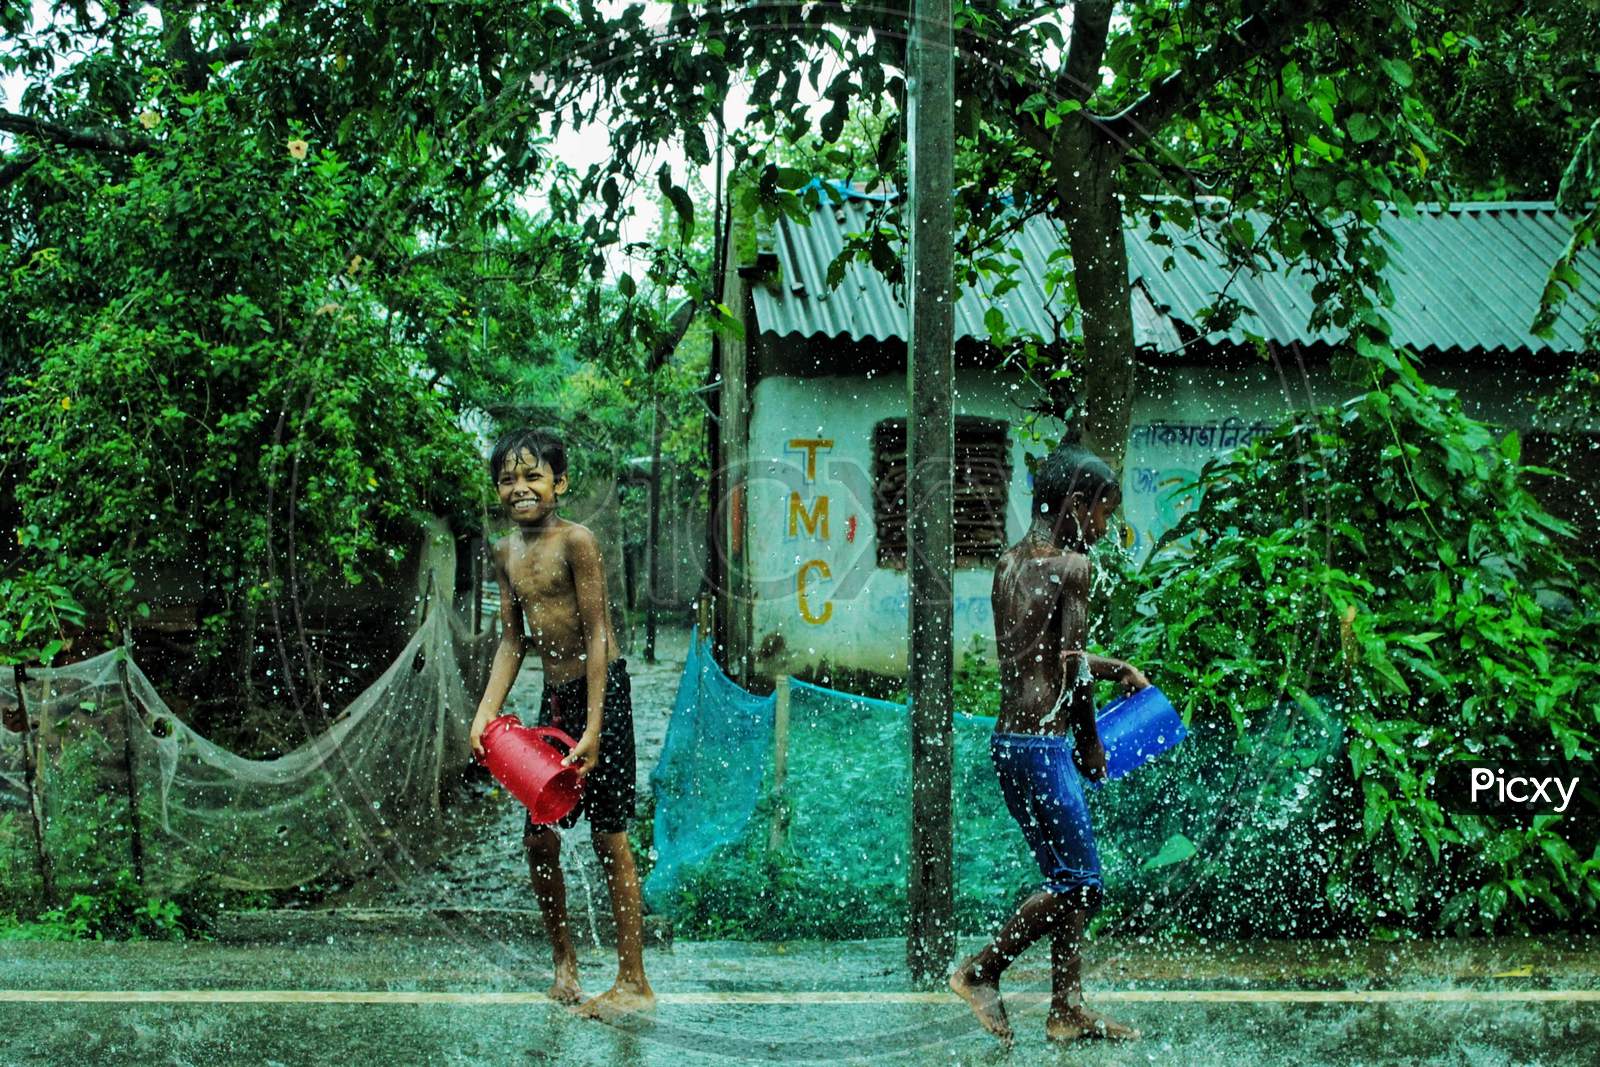 Children are playing with water in a rainy day